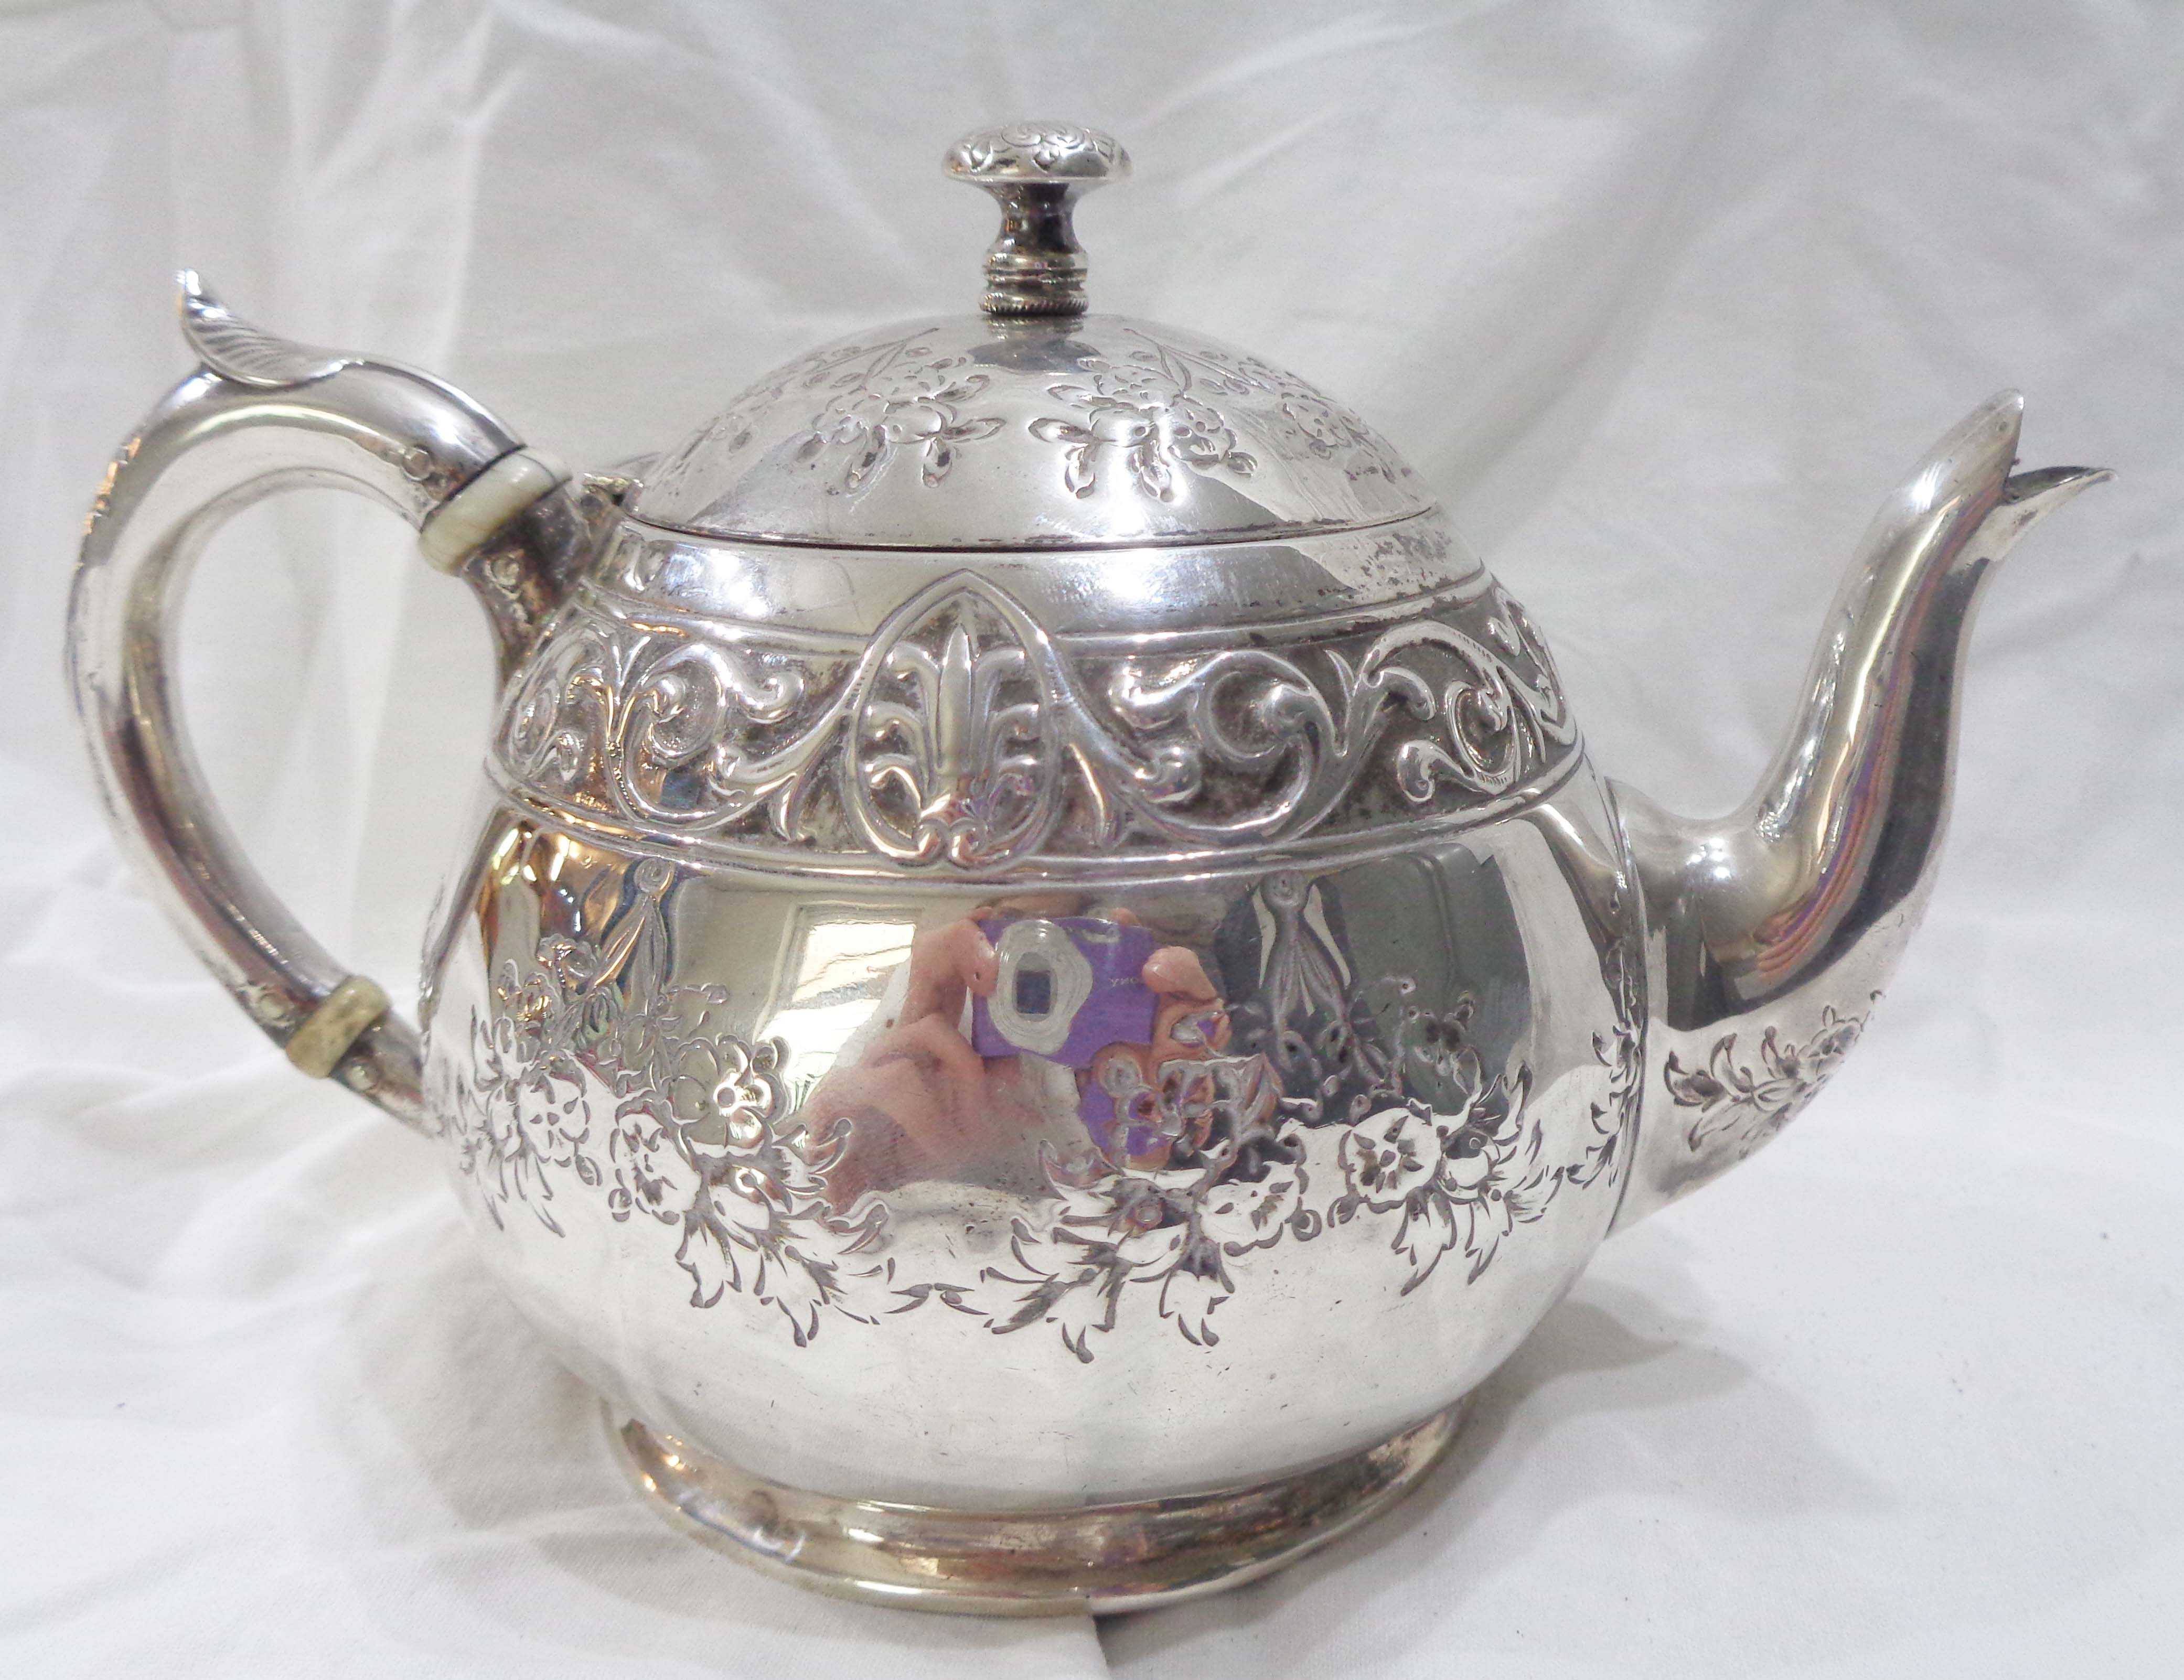 A small Victorian silver globular teapot with embossed floral swag and scroll decoration by Henry